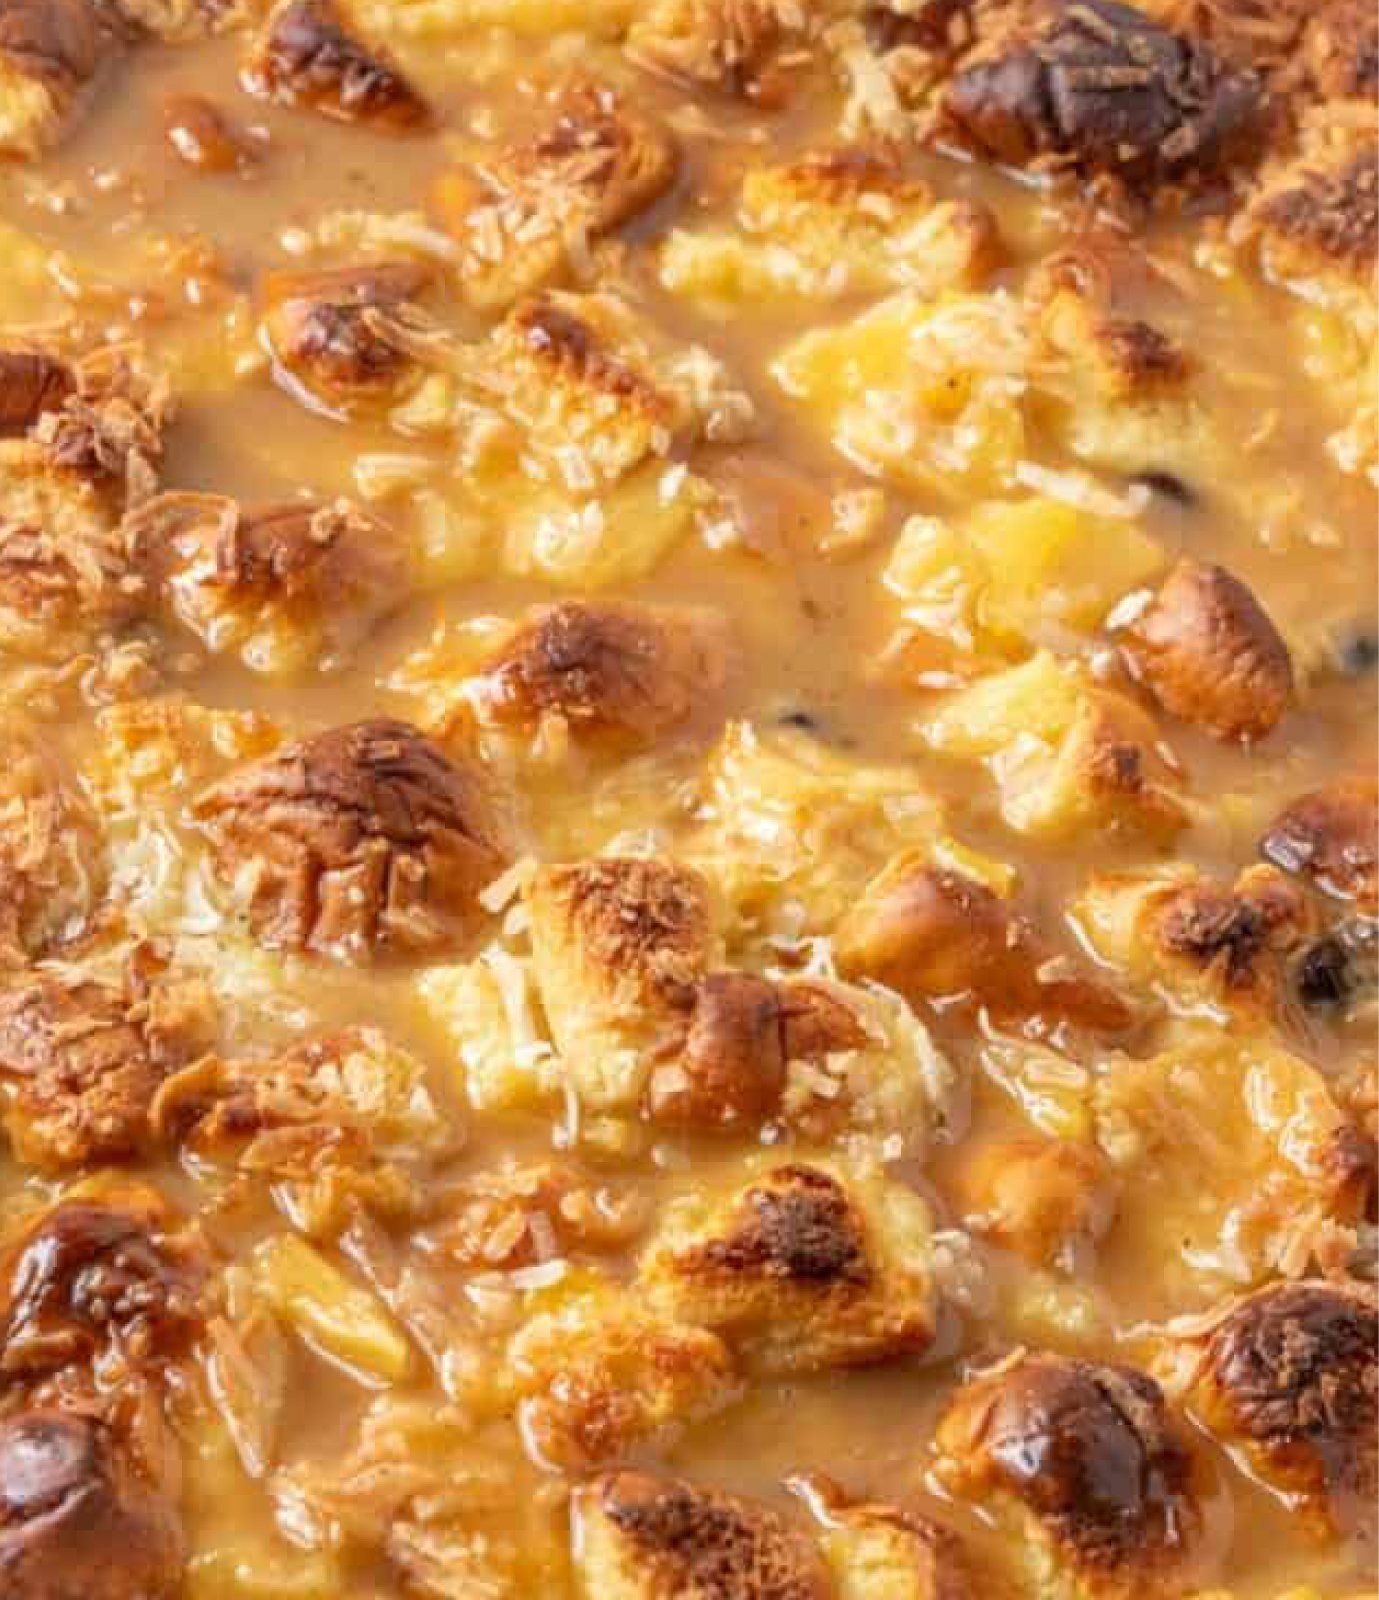 Bread pudding with Creole flavors and tropical vibes, recipe at Bay Favors Food Blog